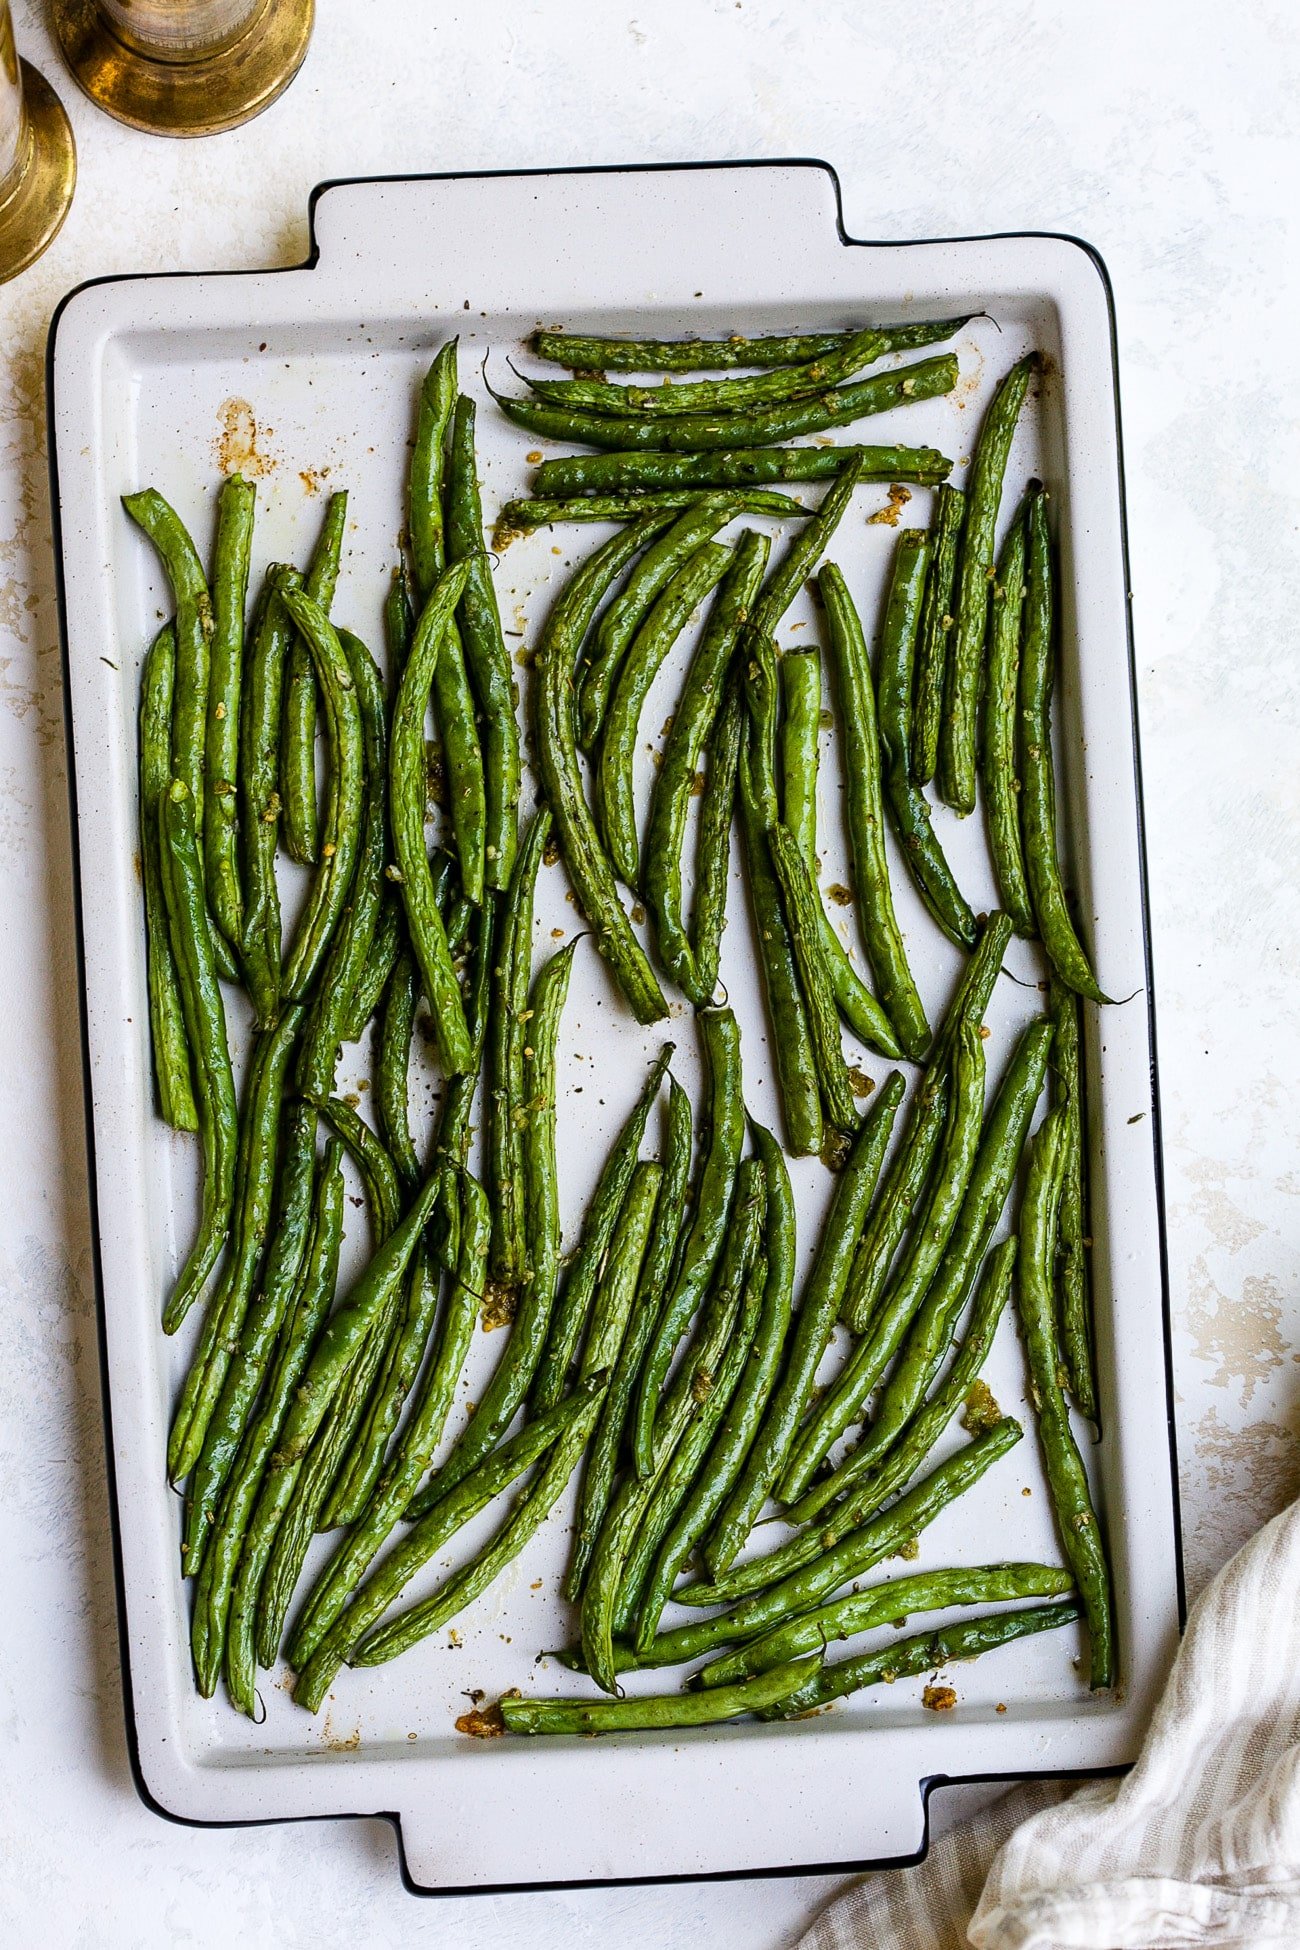 Roasted green beans on a baking sheet.